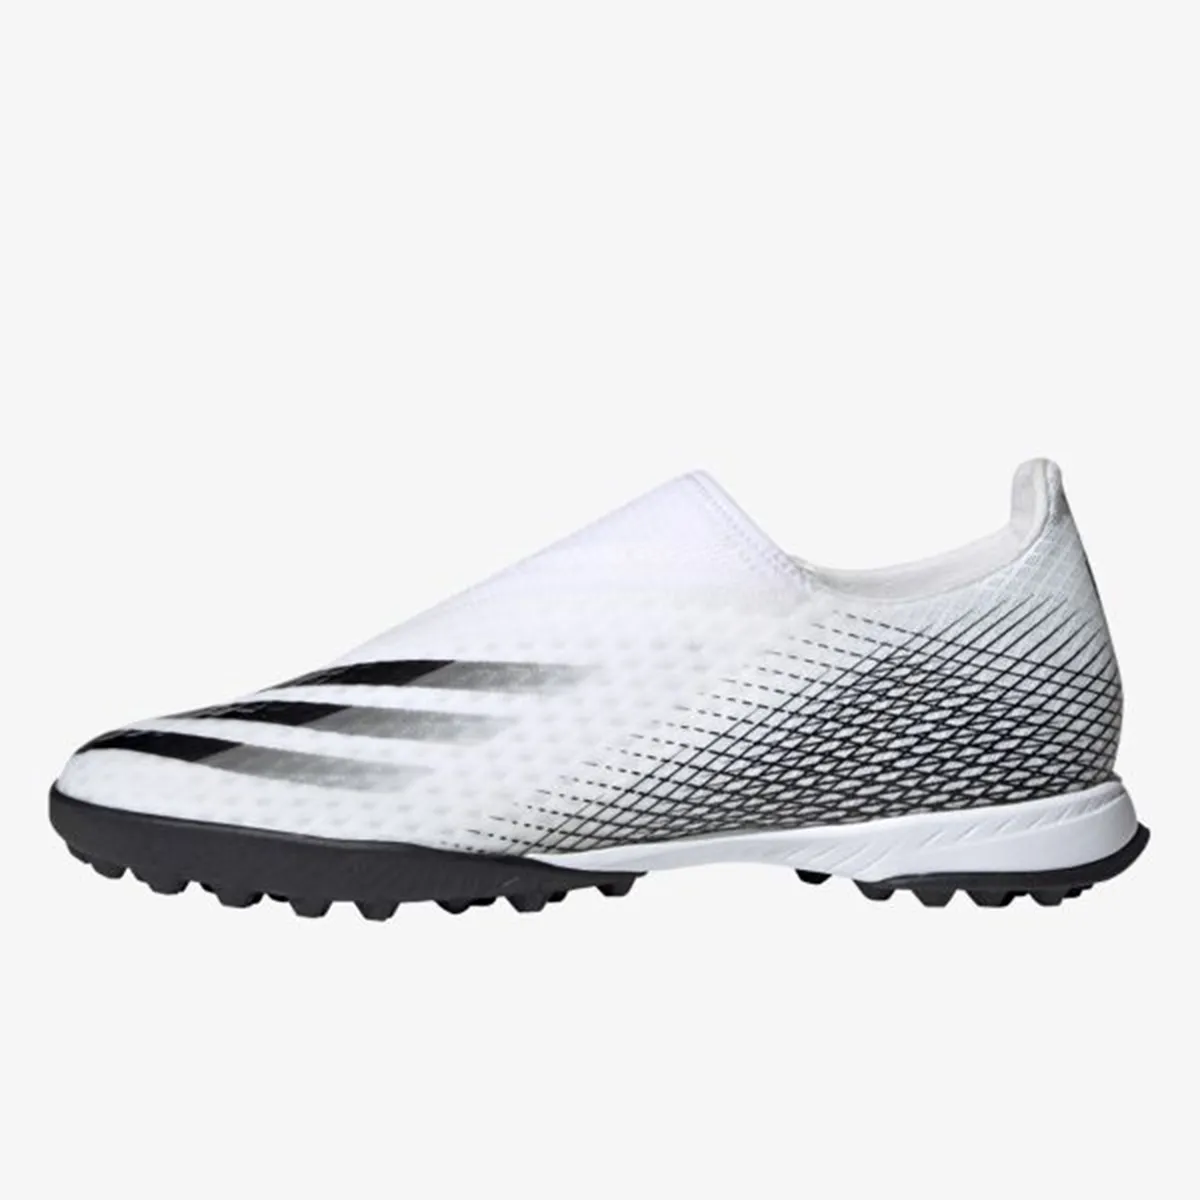 X GHOSTED.3 LACELESS TURF BOOTS